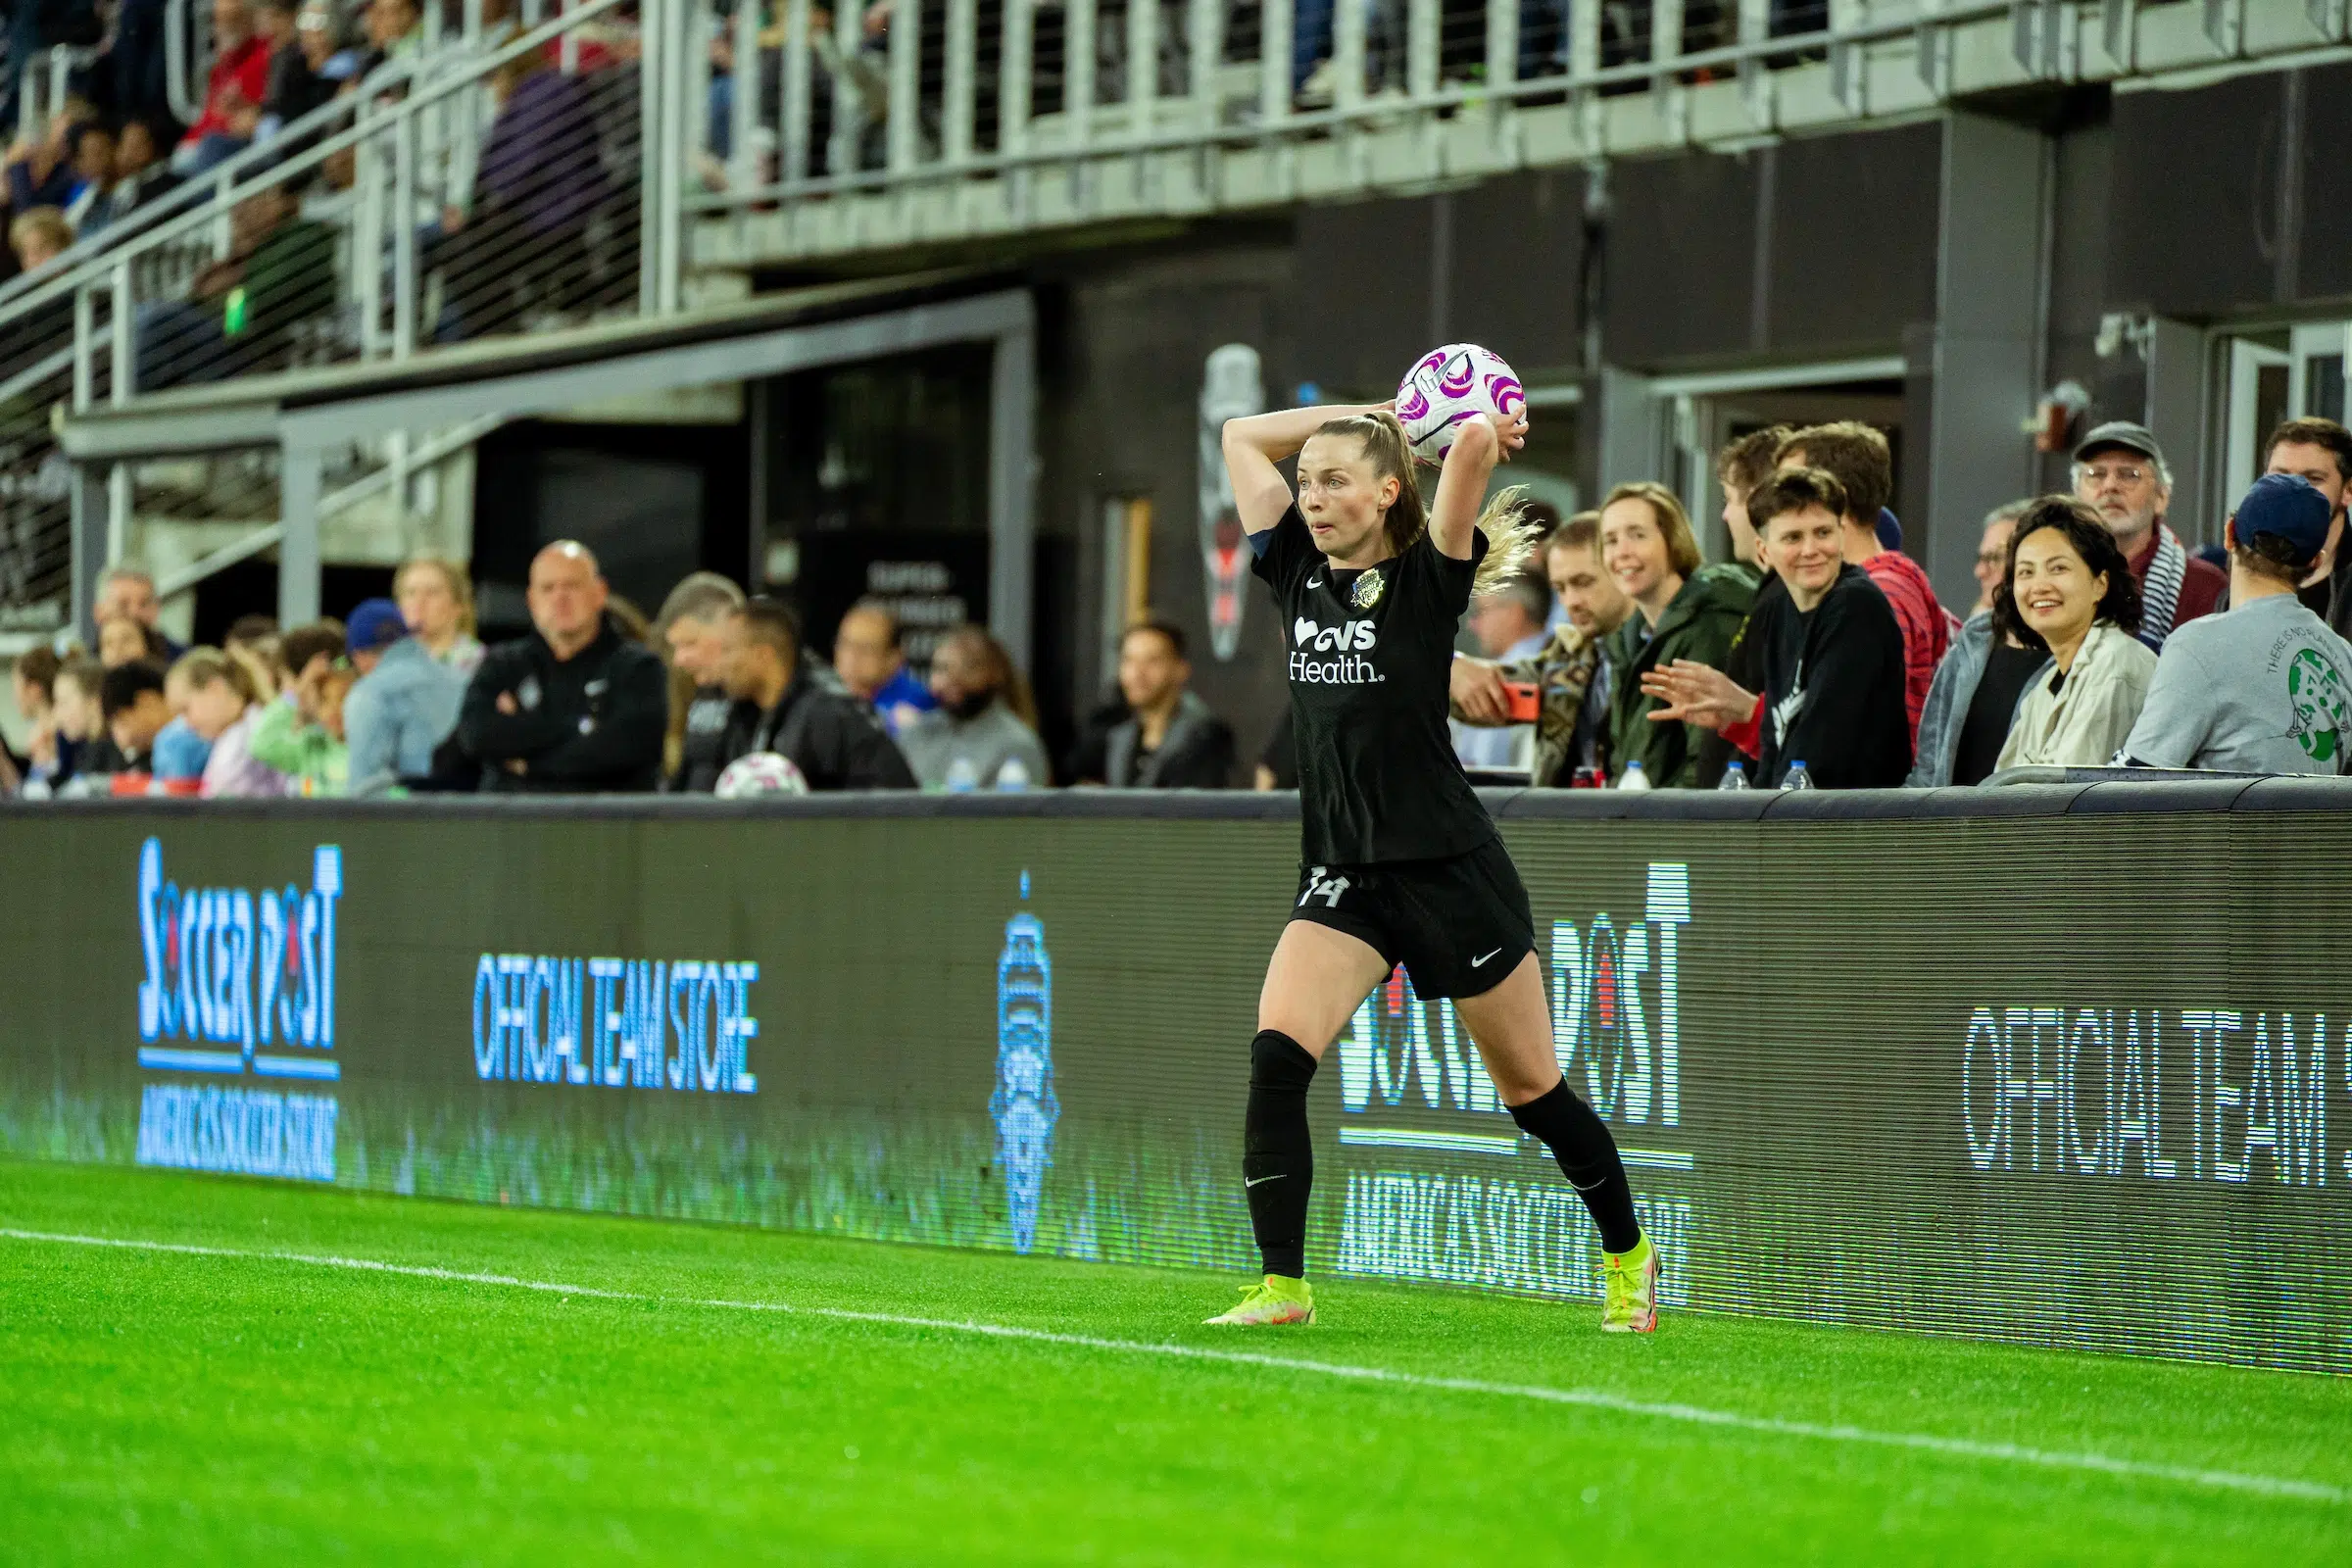 Gabby Carle in a black uniform throws a soccer ball back into the field of play.